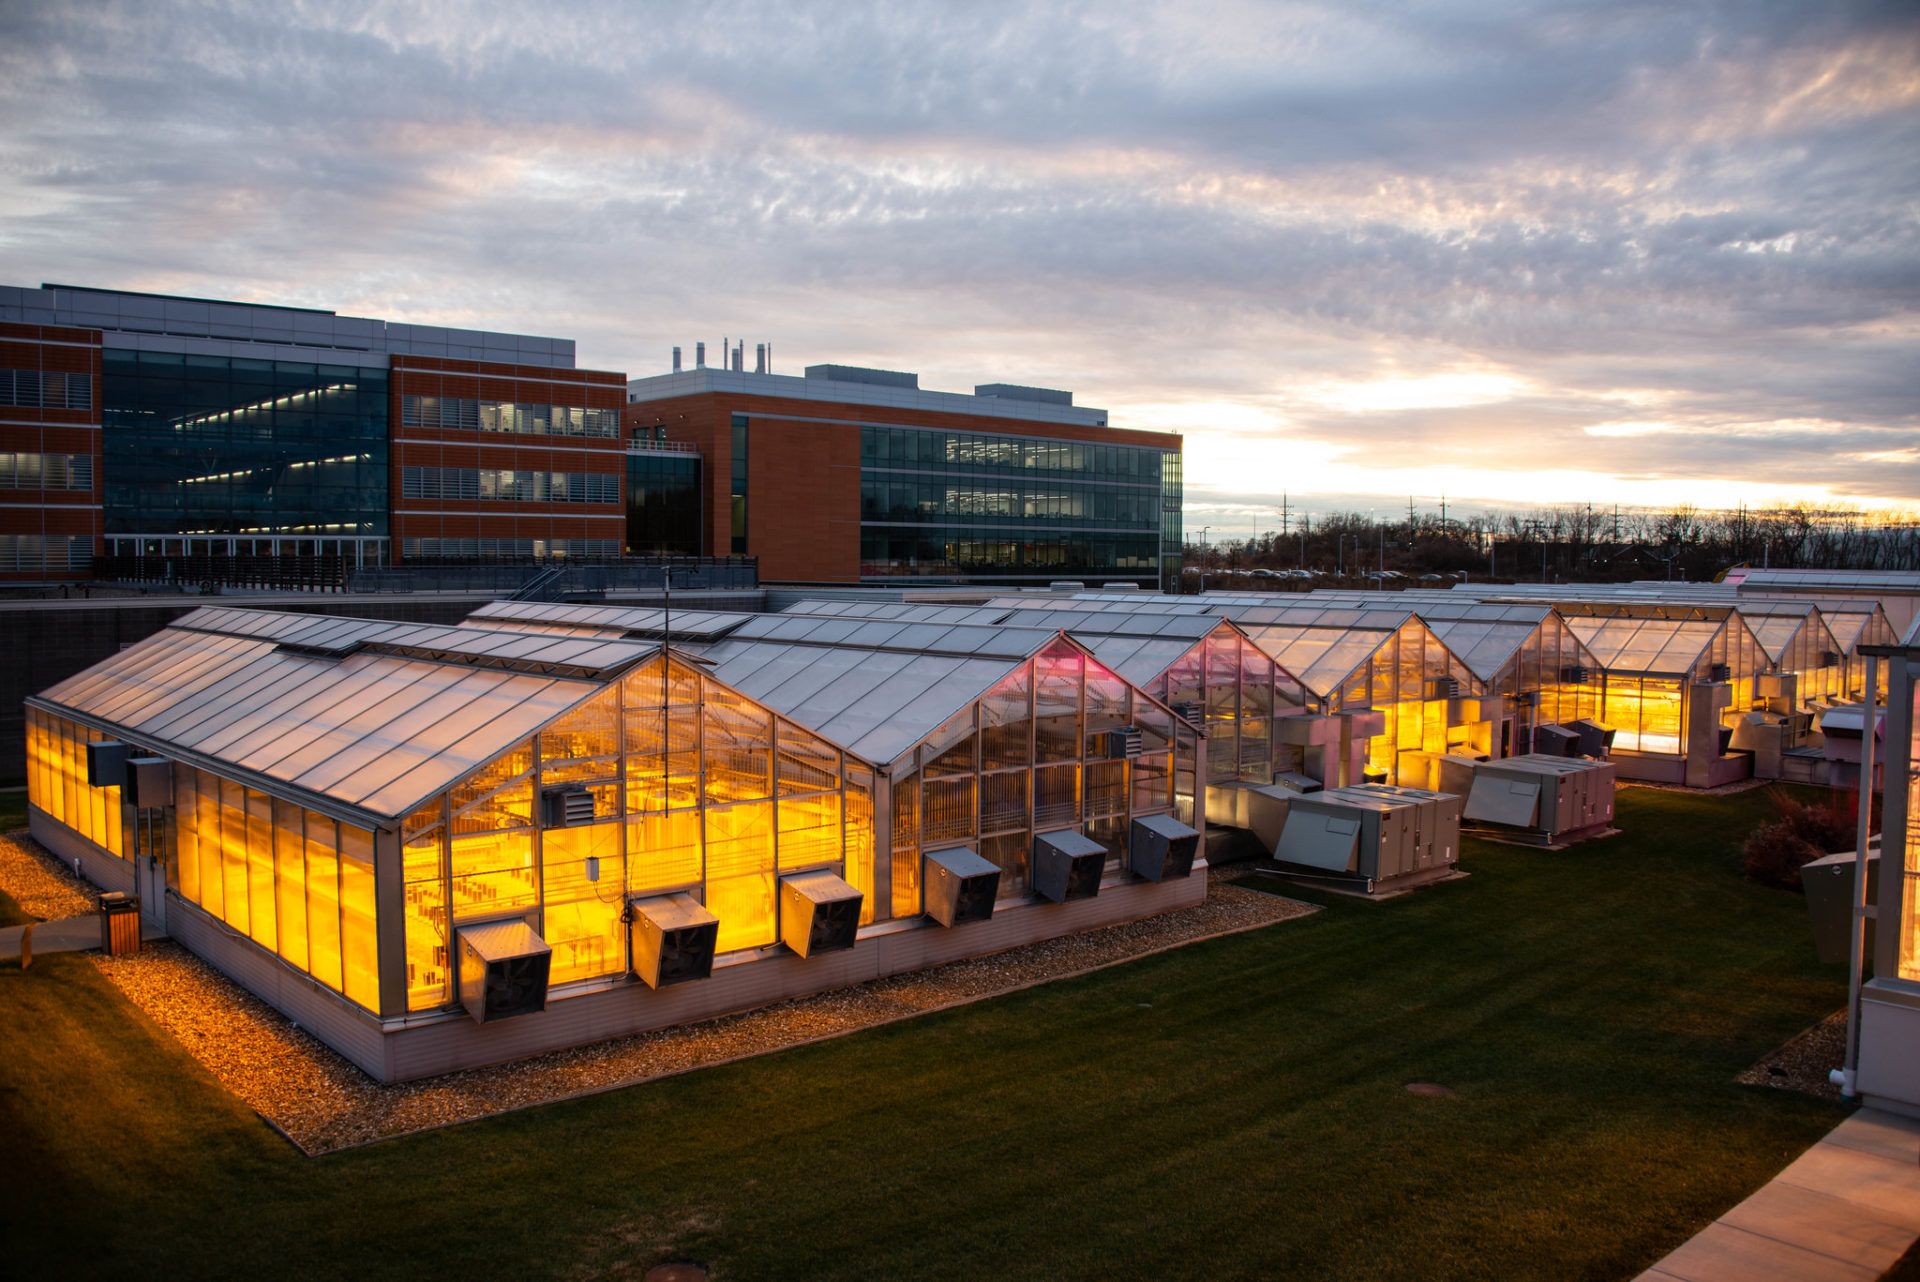 Danforth Plant Science Center aims for faster agtech innovation in-house